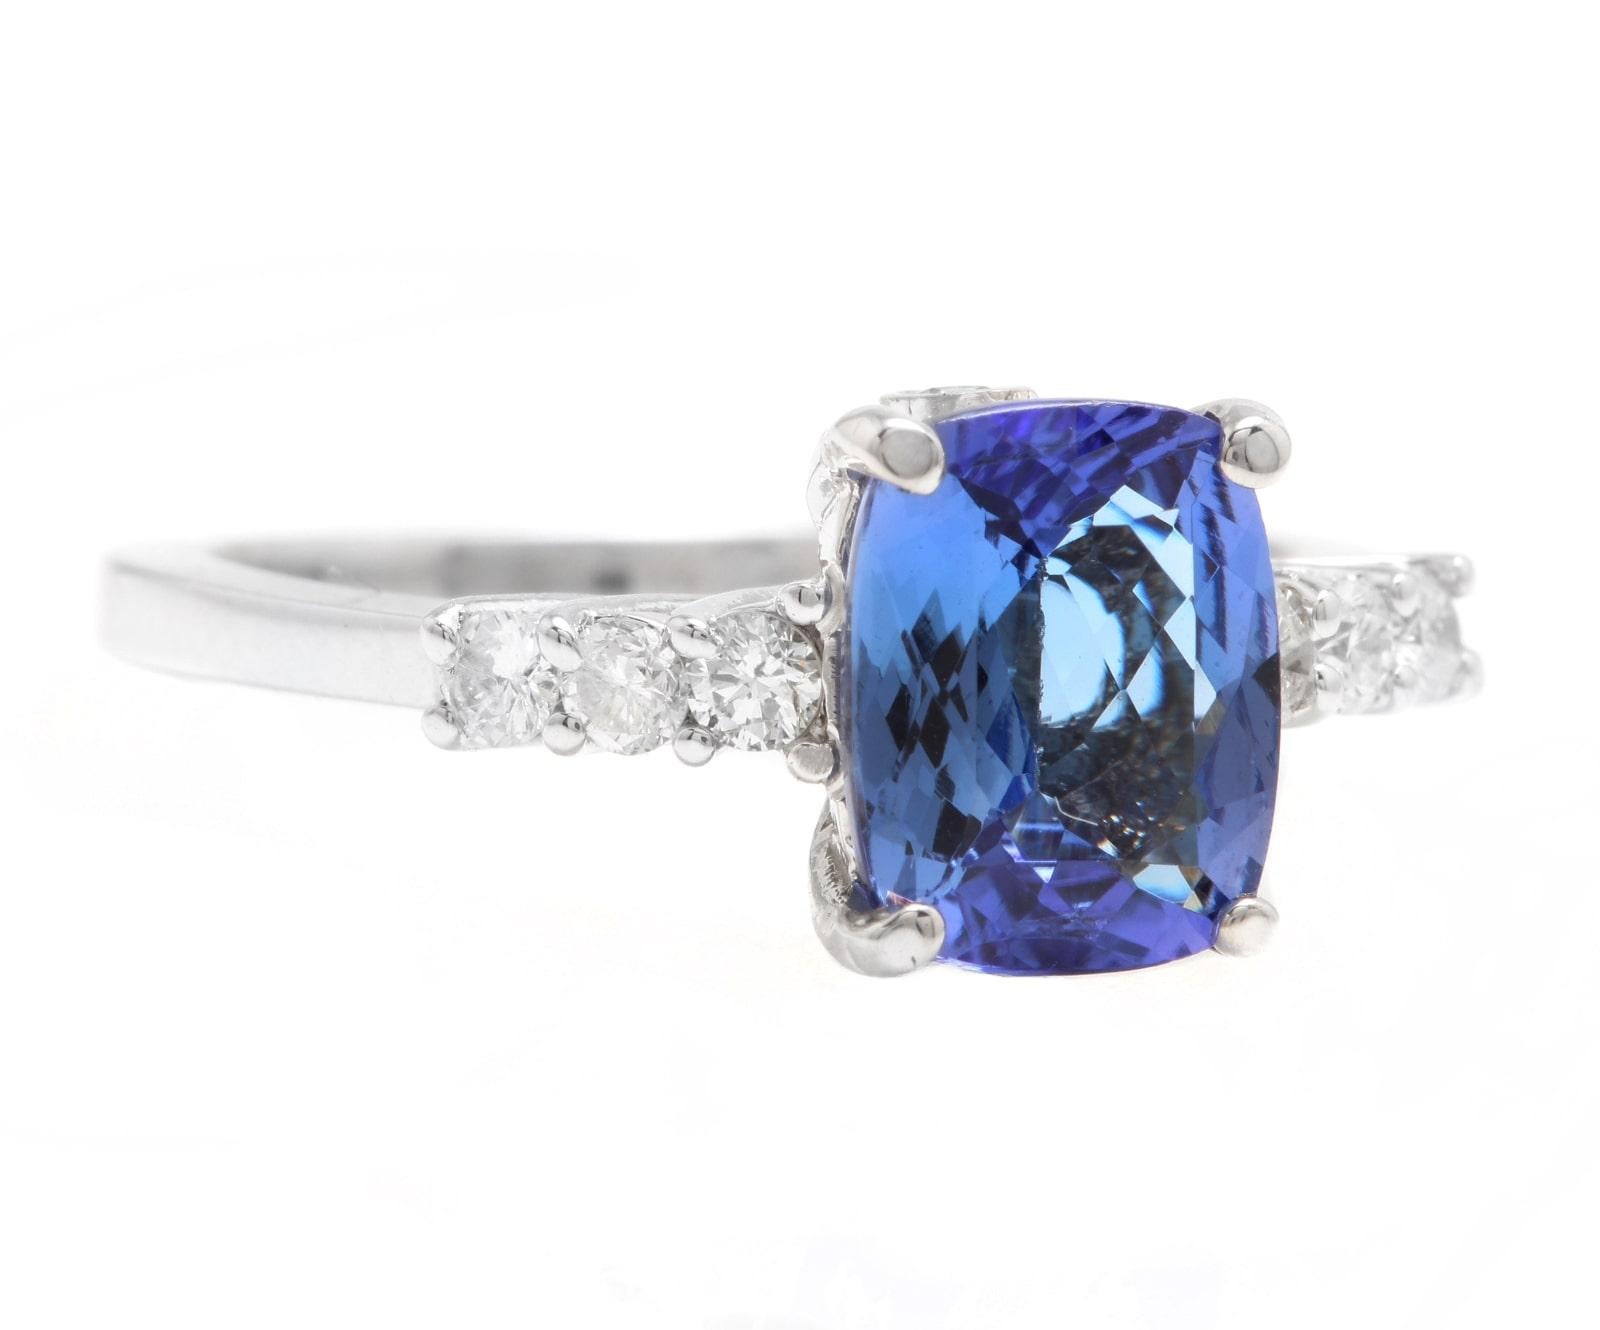 2.50 Carats Natural Very Nice Looking Tanzanite and Diamond 14K Solid White Gold Ring

Suggested Replacement Value:  $4,000.00

Total Natural Cushion Tanzanite Weight is: Approx. 2.15 Carats 

Tanzanite Measures Approx. 9 x 7mm

Natural Round